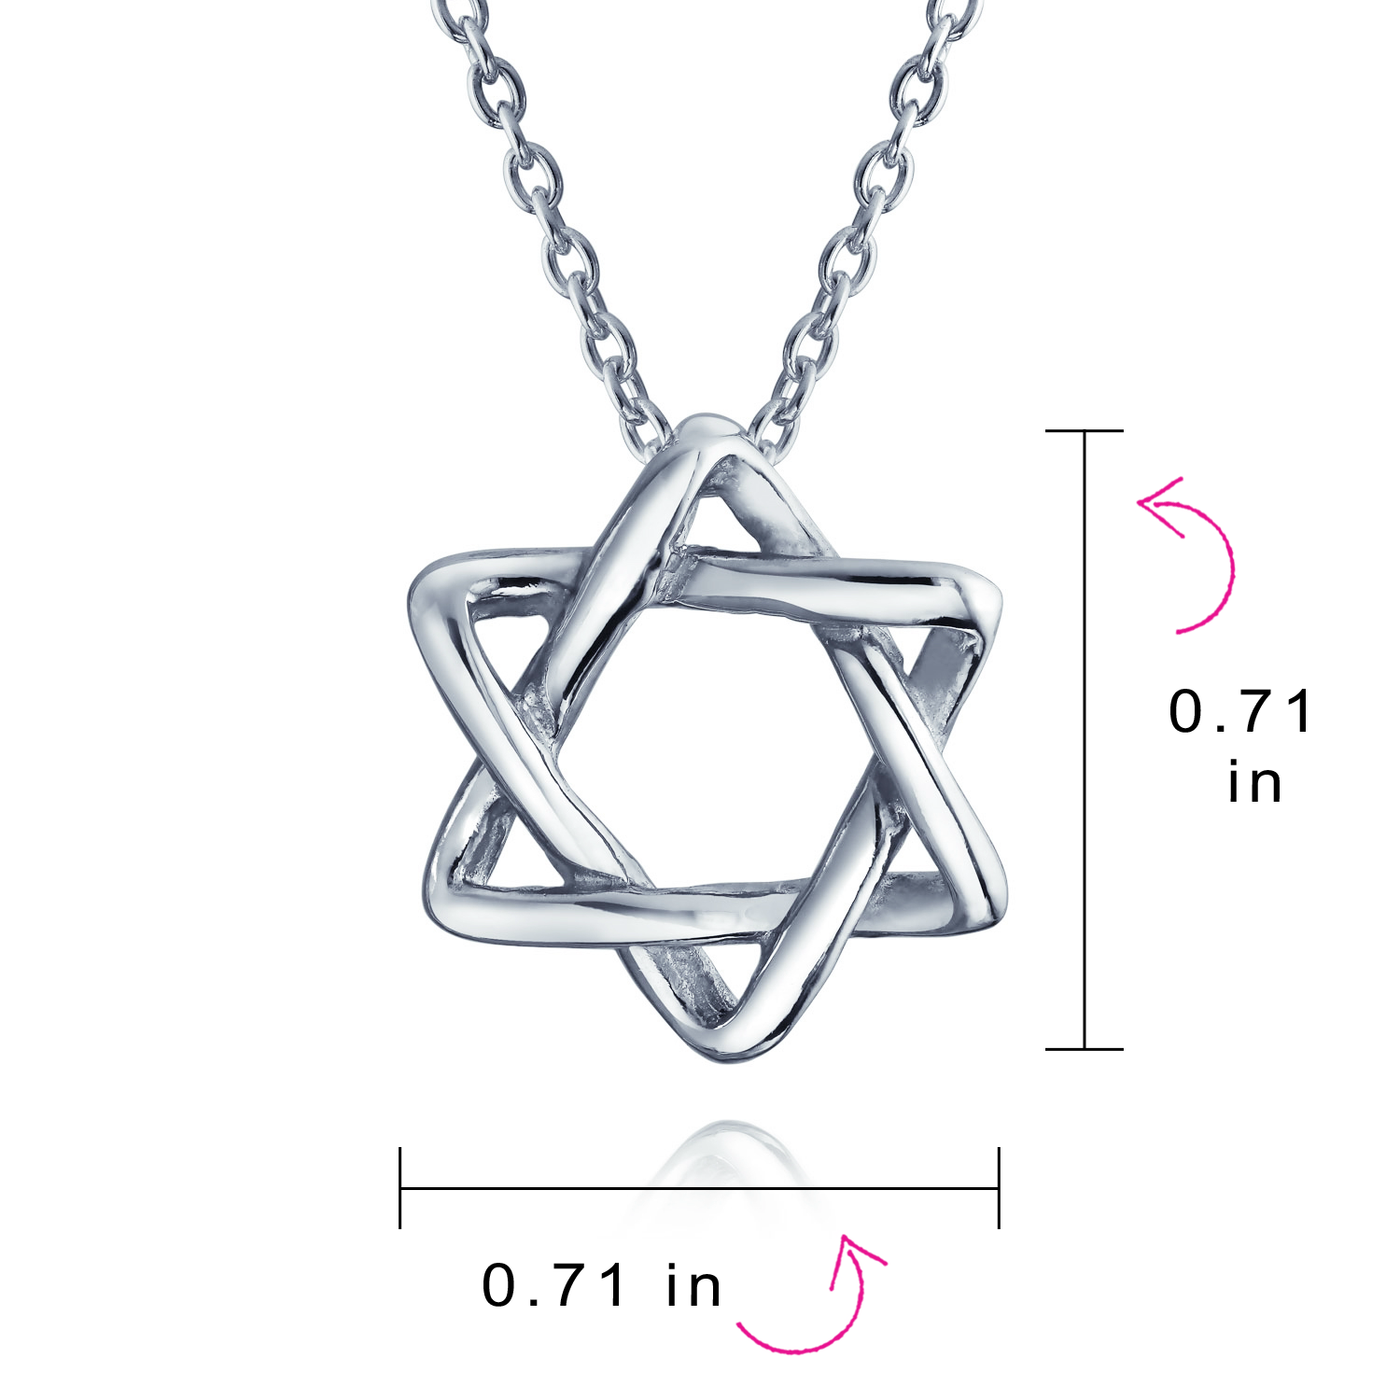 Star OF David Magen Je Intertwined Pendant Necklace Sterling Silver